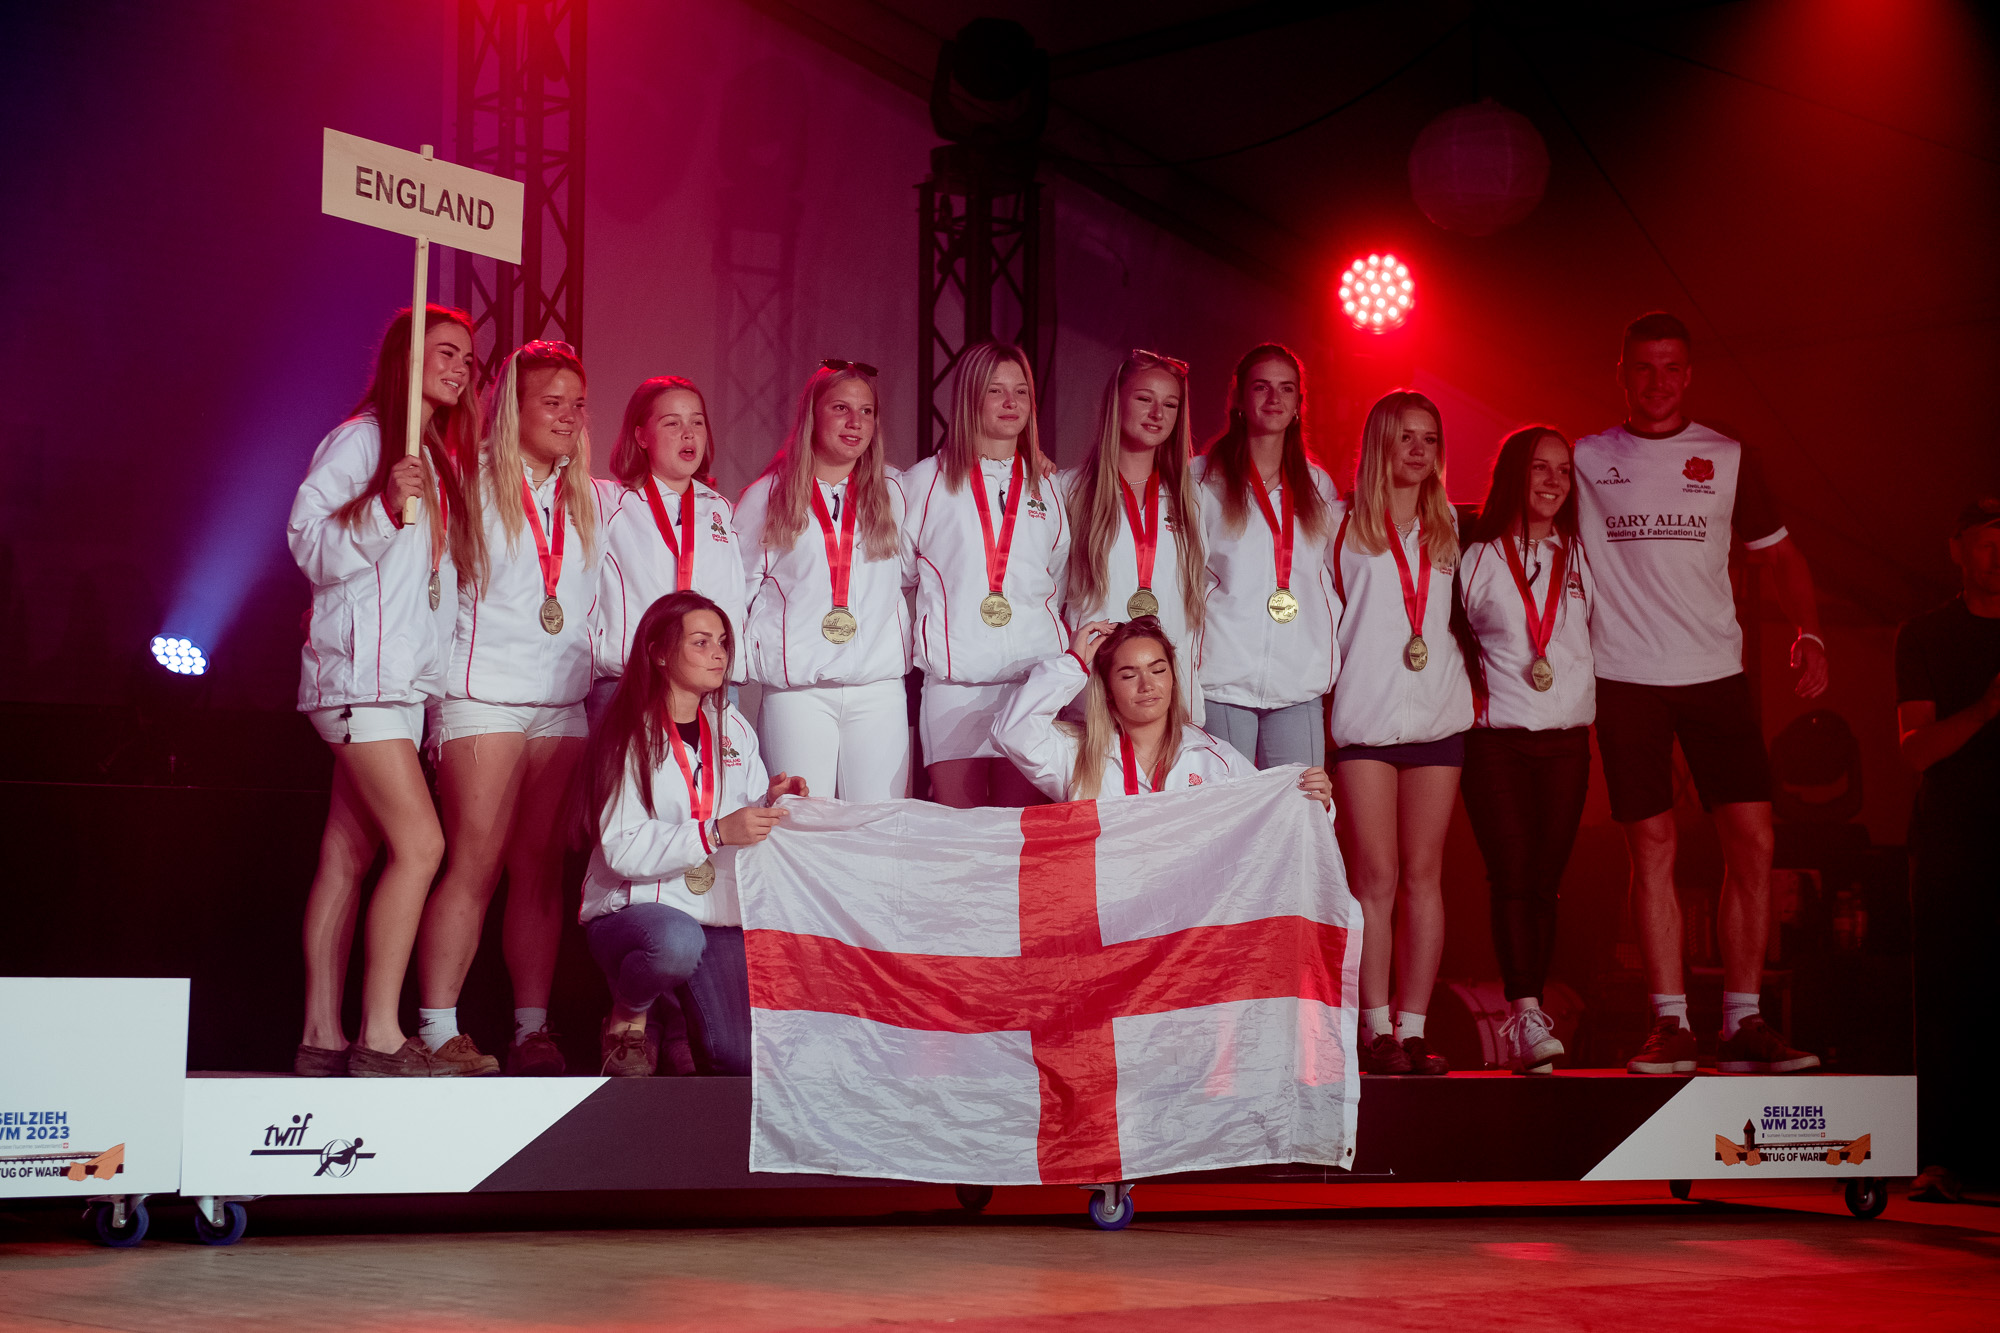 England Junior Ladies on the Podium Collecting their Medals at the Evening Ceremony. Image Credit Tug of War 2023 Organising Committee